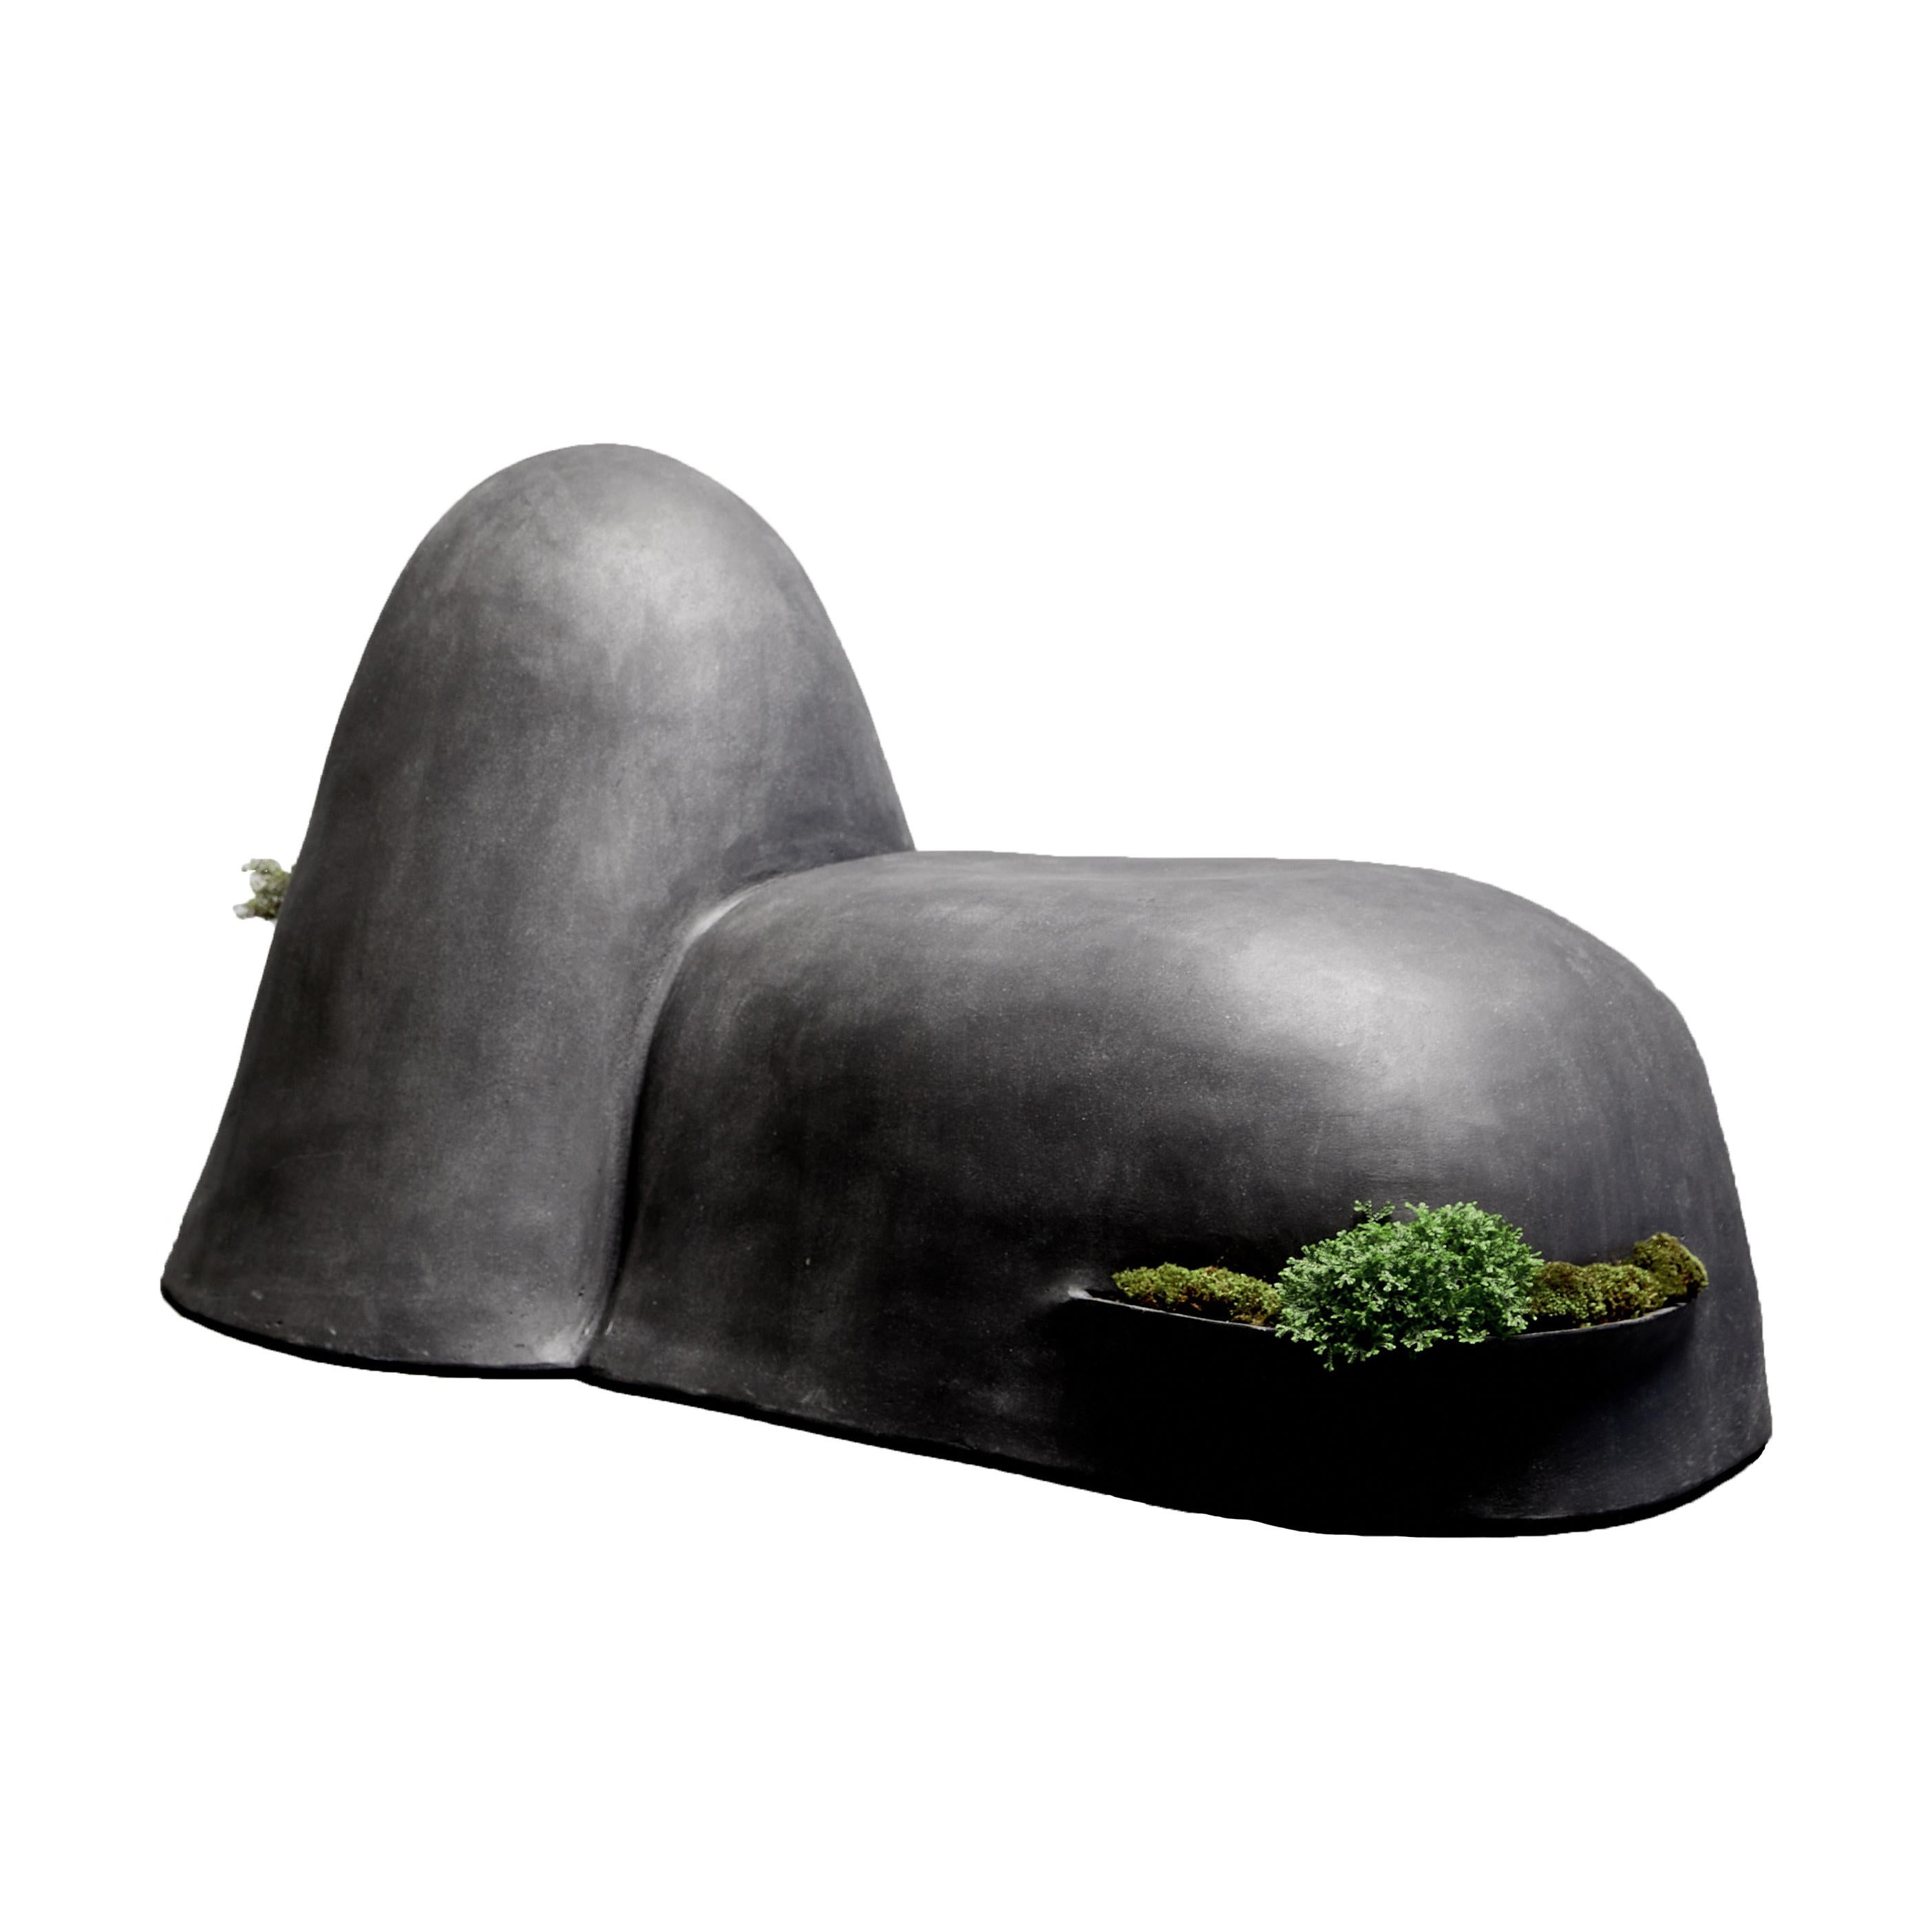 Soy Una Roca concrete rock seats are an elegant way to introduce nature and sculpture into your space. Like all Opiary products, these are hand-sculpted in our Brooklyn studio and fully customizable. 

DETAILS
Sold individually. Measures: Medium